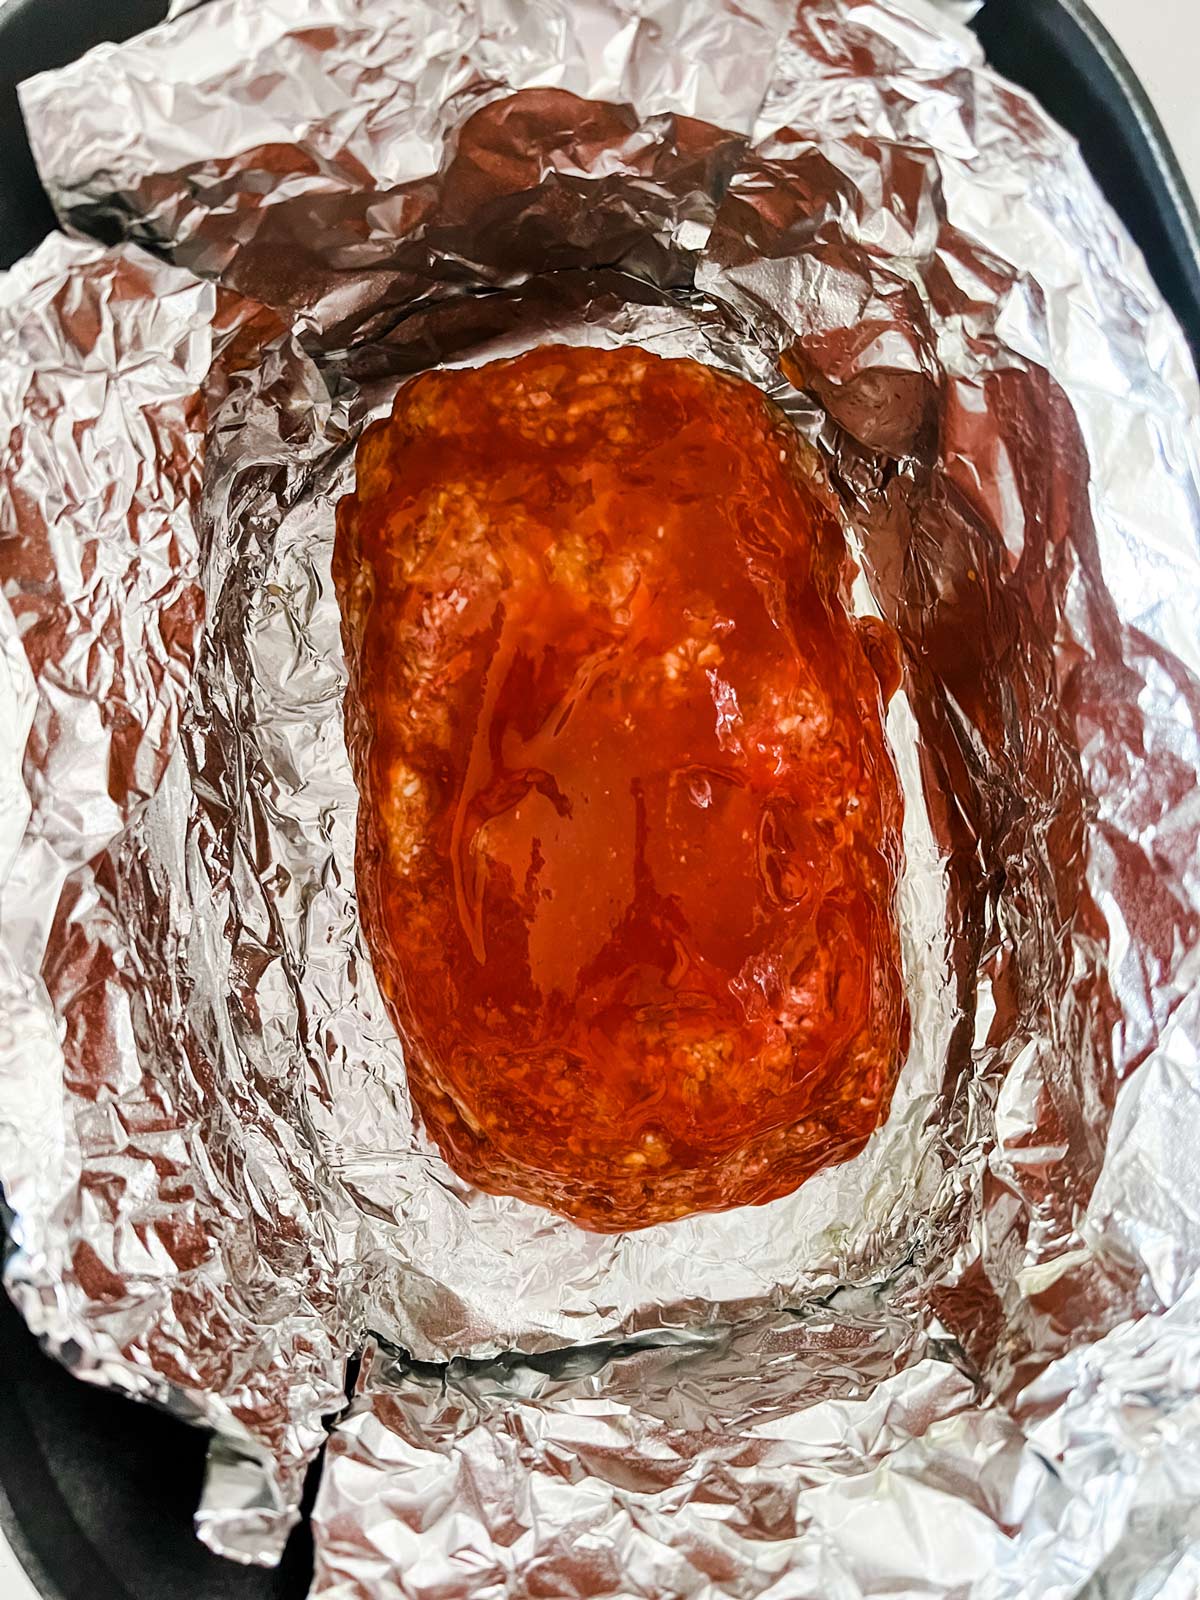 A glazed meatloaf in a slow cooker ready to cook.